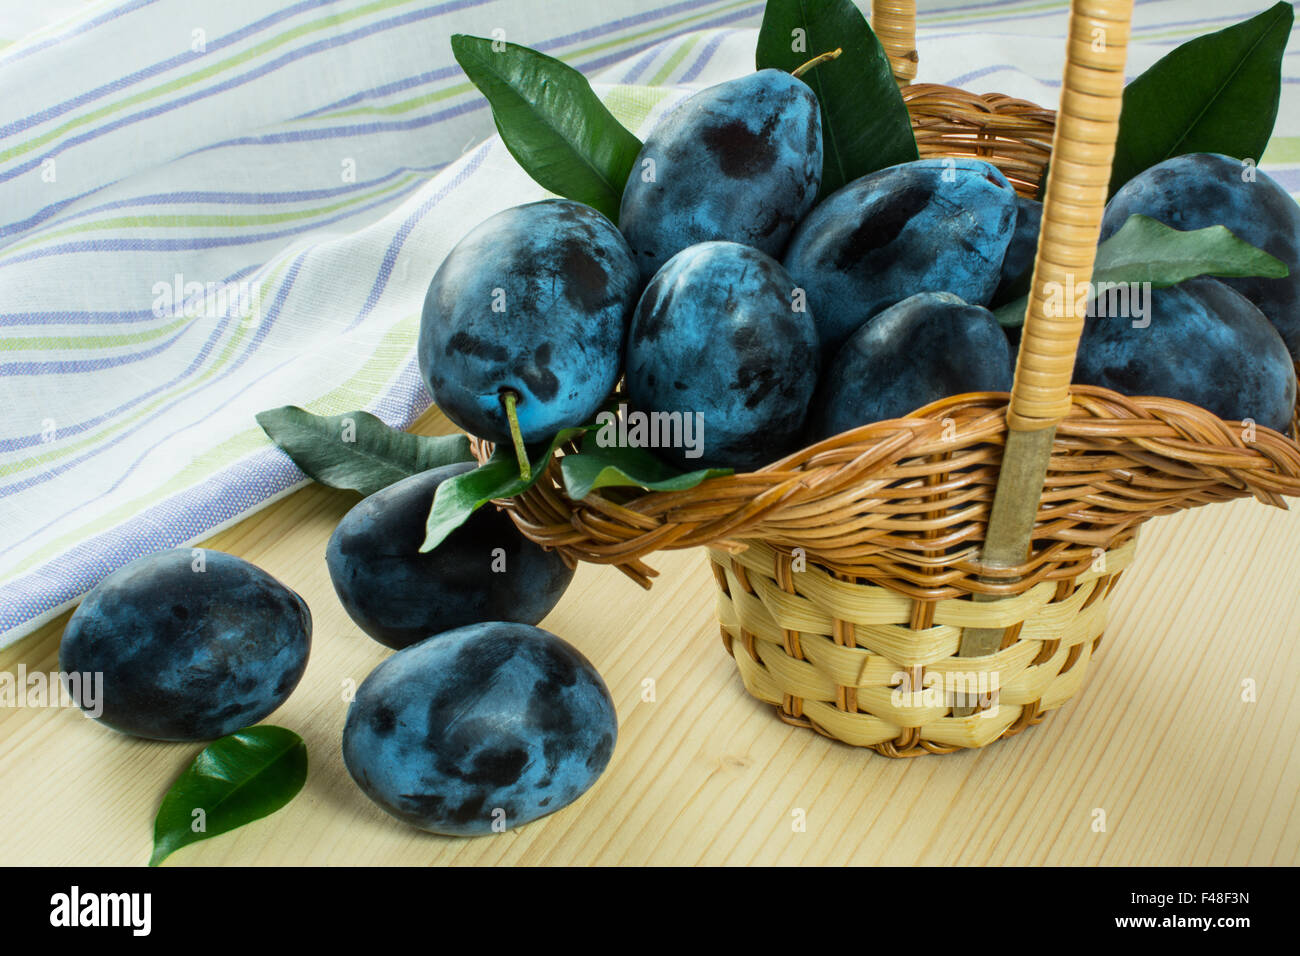 Ripe plums green leaves in small wicker basket on light wooden table with linen striped towel. Selective focus Stock Photo